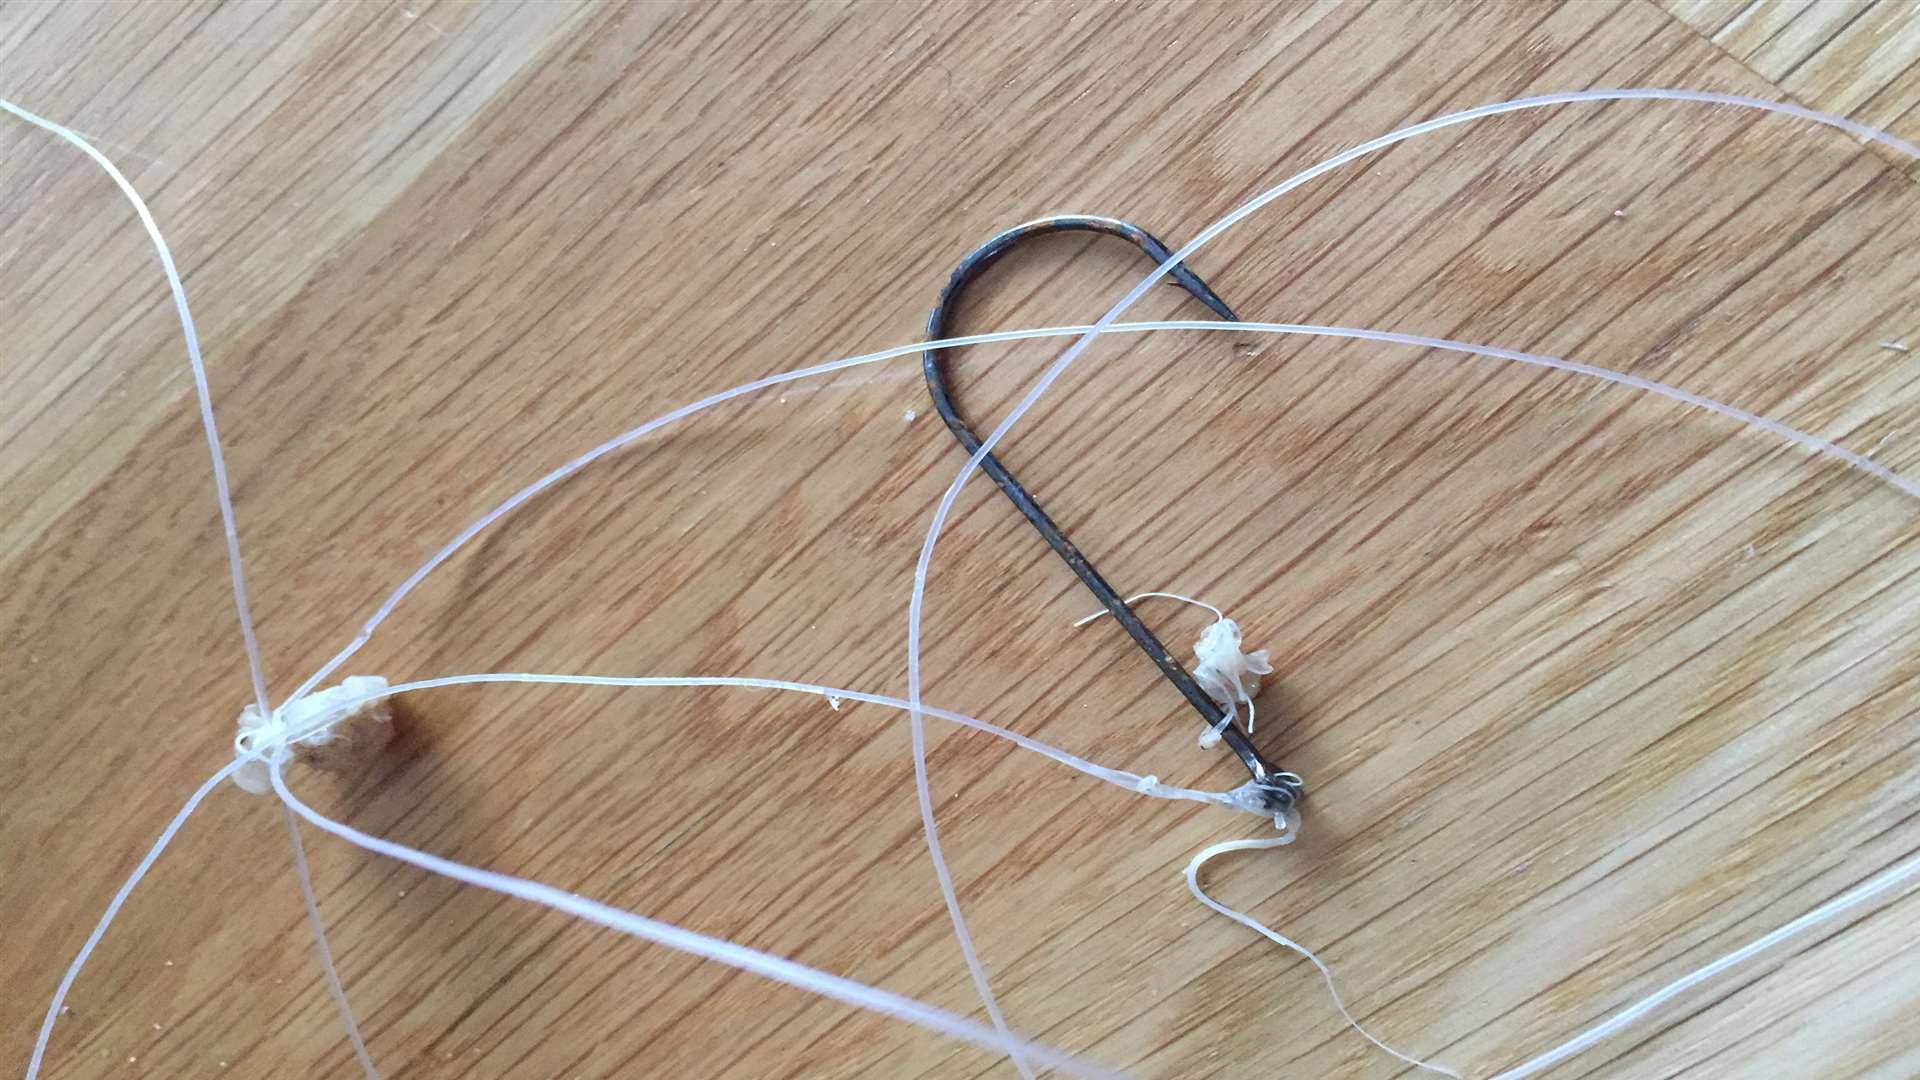 The two inch fishing hook was removed during a half hour operation